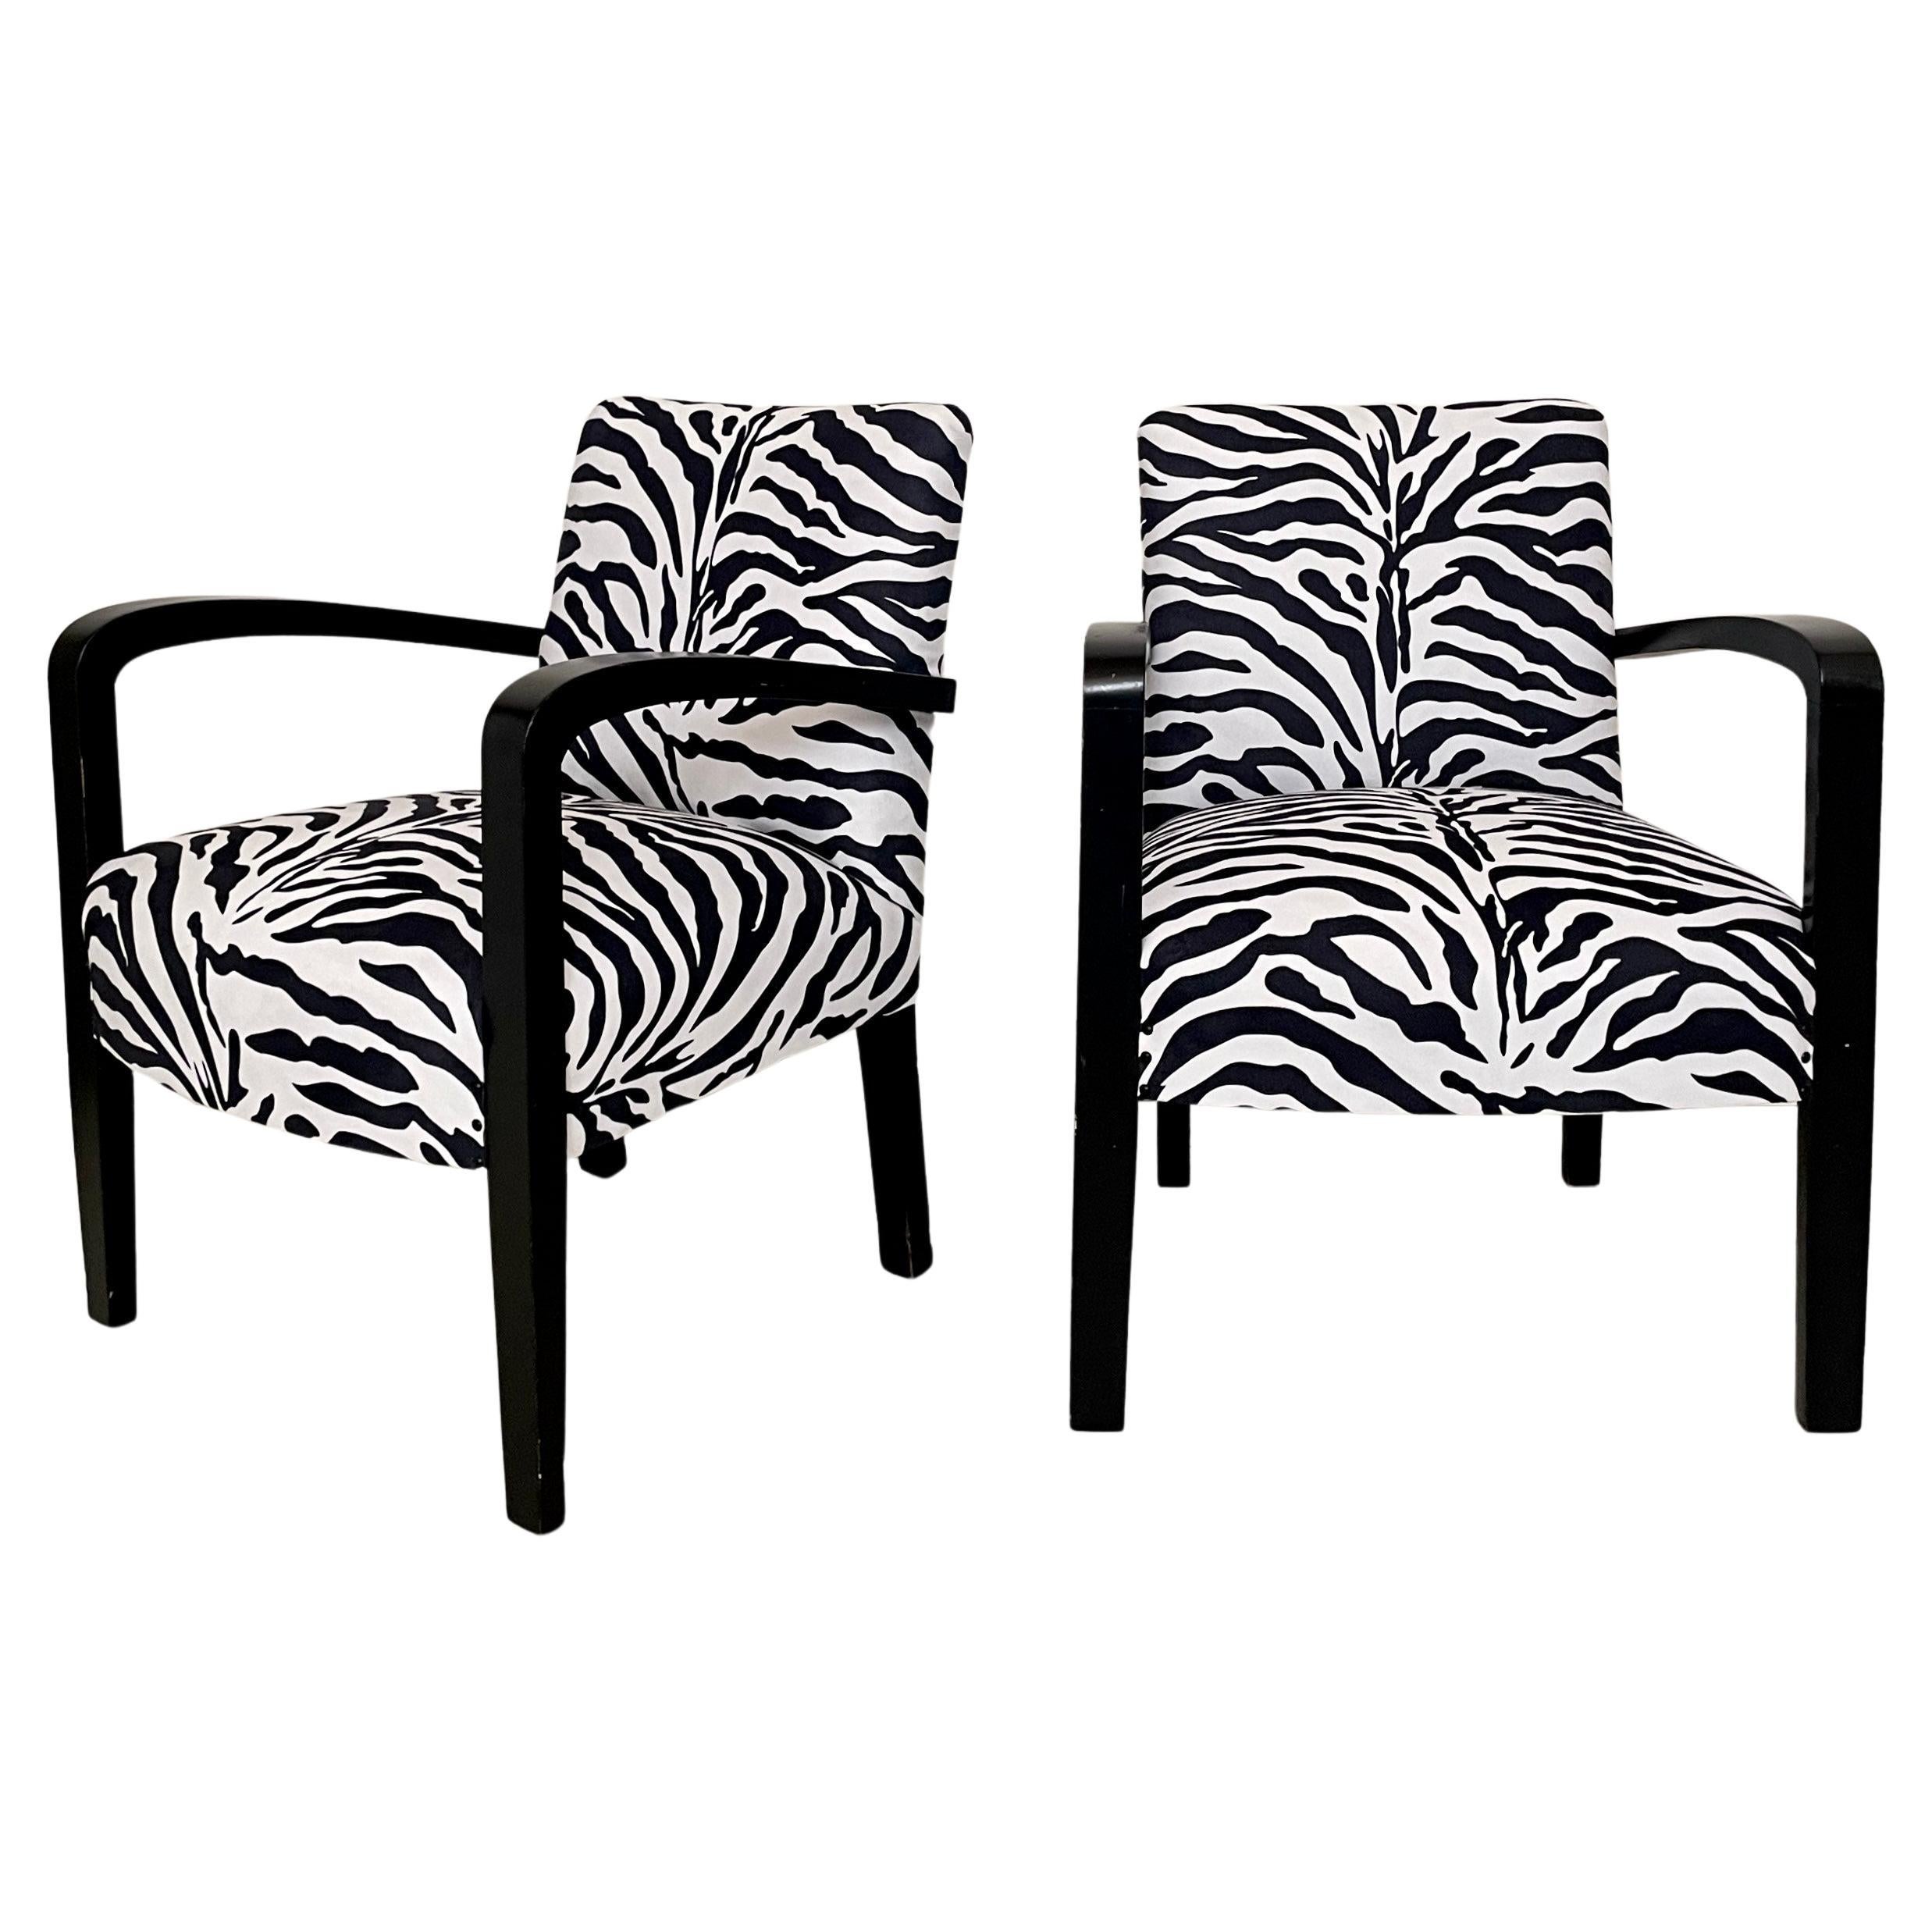 Pair French Art Deco Armchairs in Black Wood and Zebra Style Fabric, Around 1930